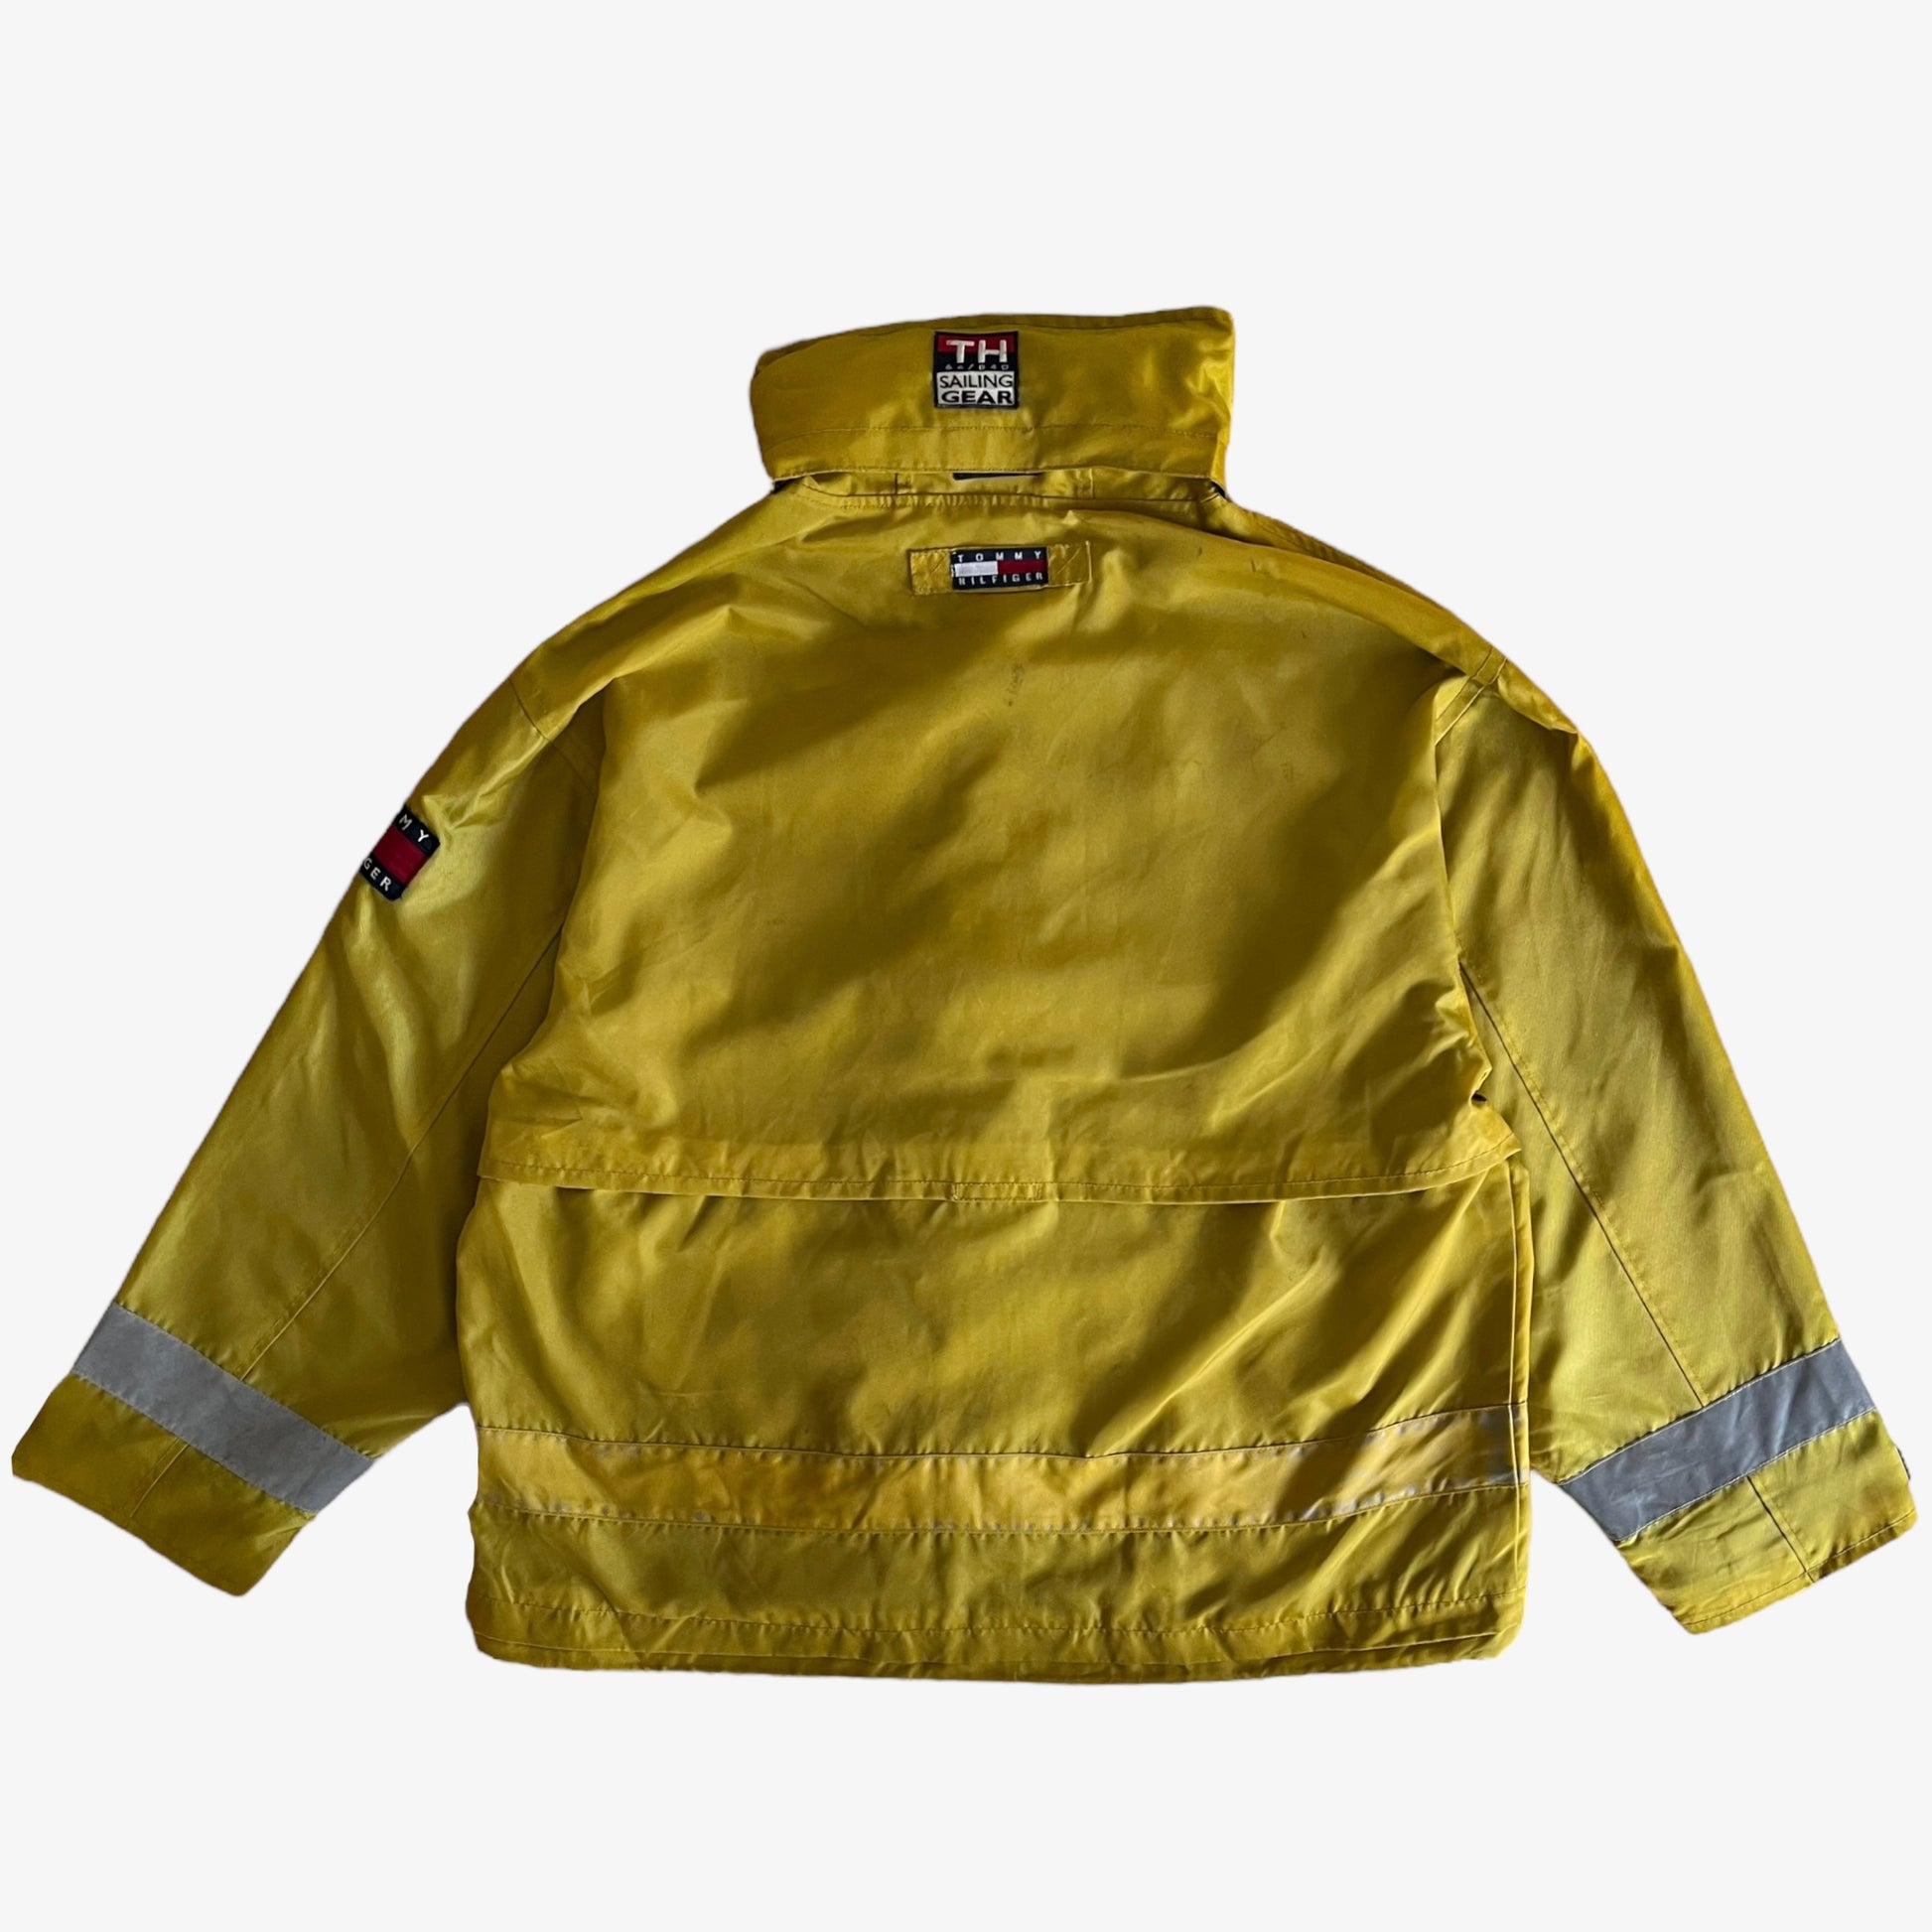 Vintage 90s Tommy Hilfiger Yellow Sailing Gear Jacket With Hook Fasteners Back - Casspios Dream